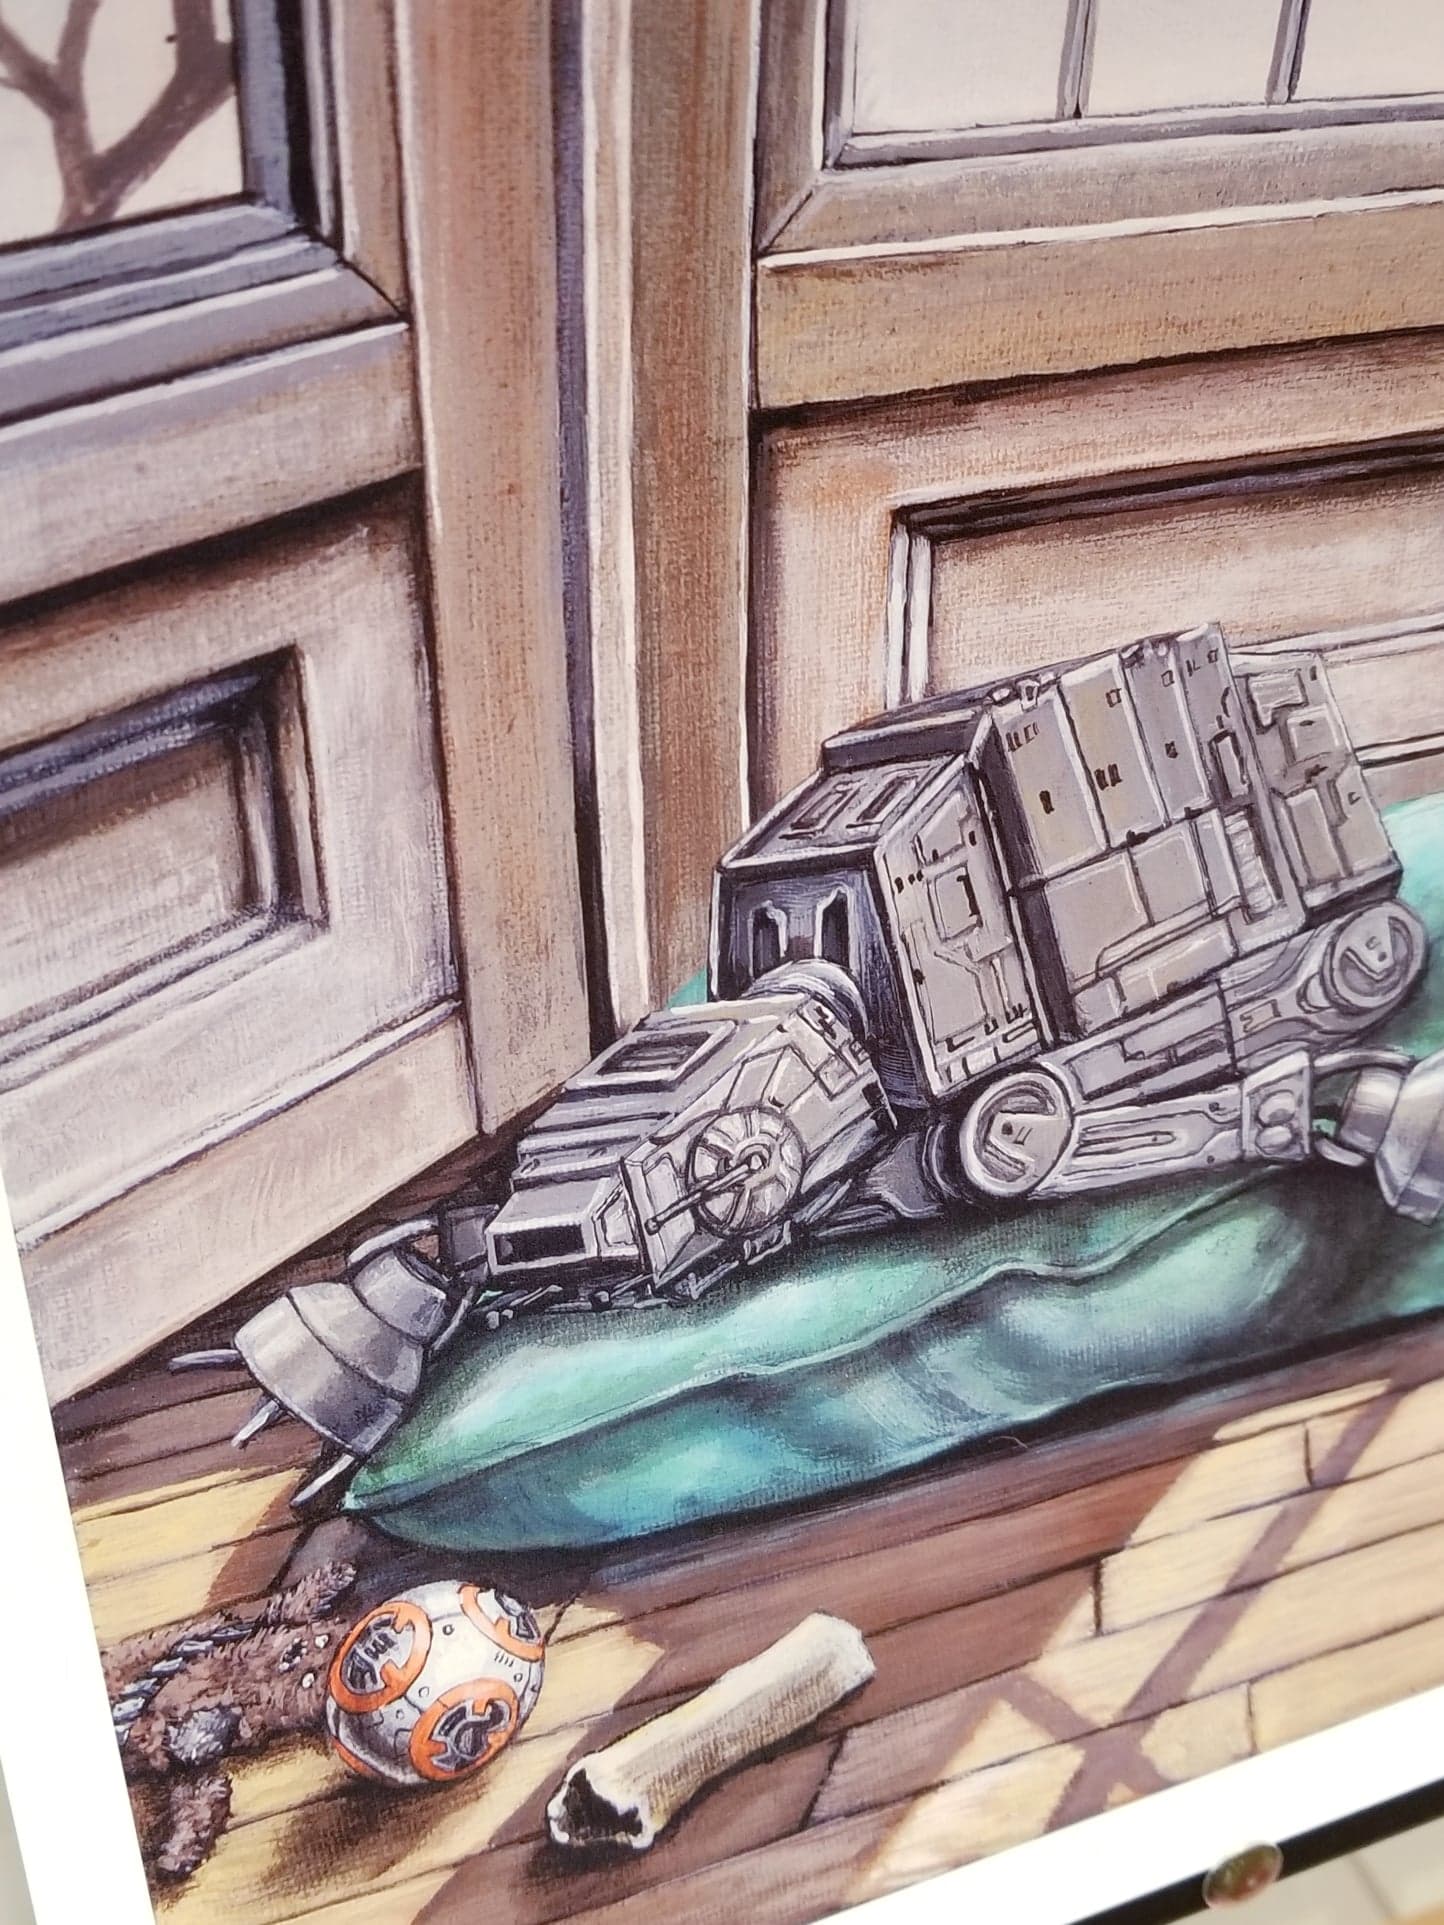 "Imperial Pupper" Star Wars Parody Art Print by Ashley Raine  Who's a good AT-AT? This boy is, and he's taking a well deserved puppy nap by the window! This Star Wars parody art is perfect for Imperial War Machine lovers and Sith Sympathizers of course, but also for any Star Wars fan who loves their fur-babies!    Details to Enjoy: Pup has a Wookiee toy with a torn-off arm, a bone, a comfy bed, and a well loved BB-8 chewy toy for only the best of good boys.